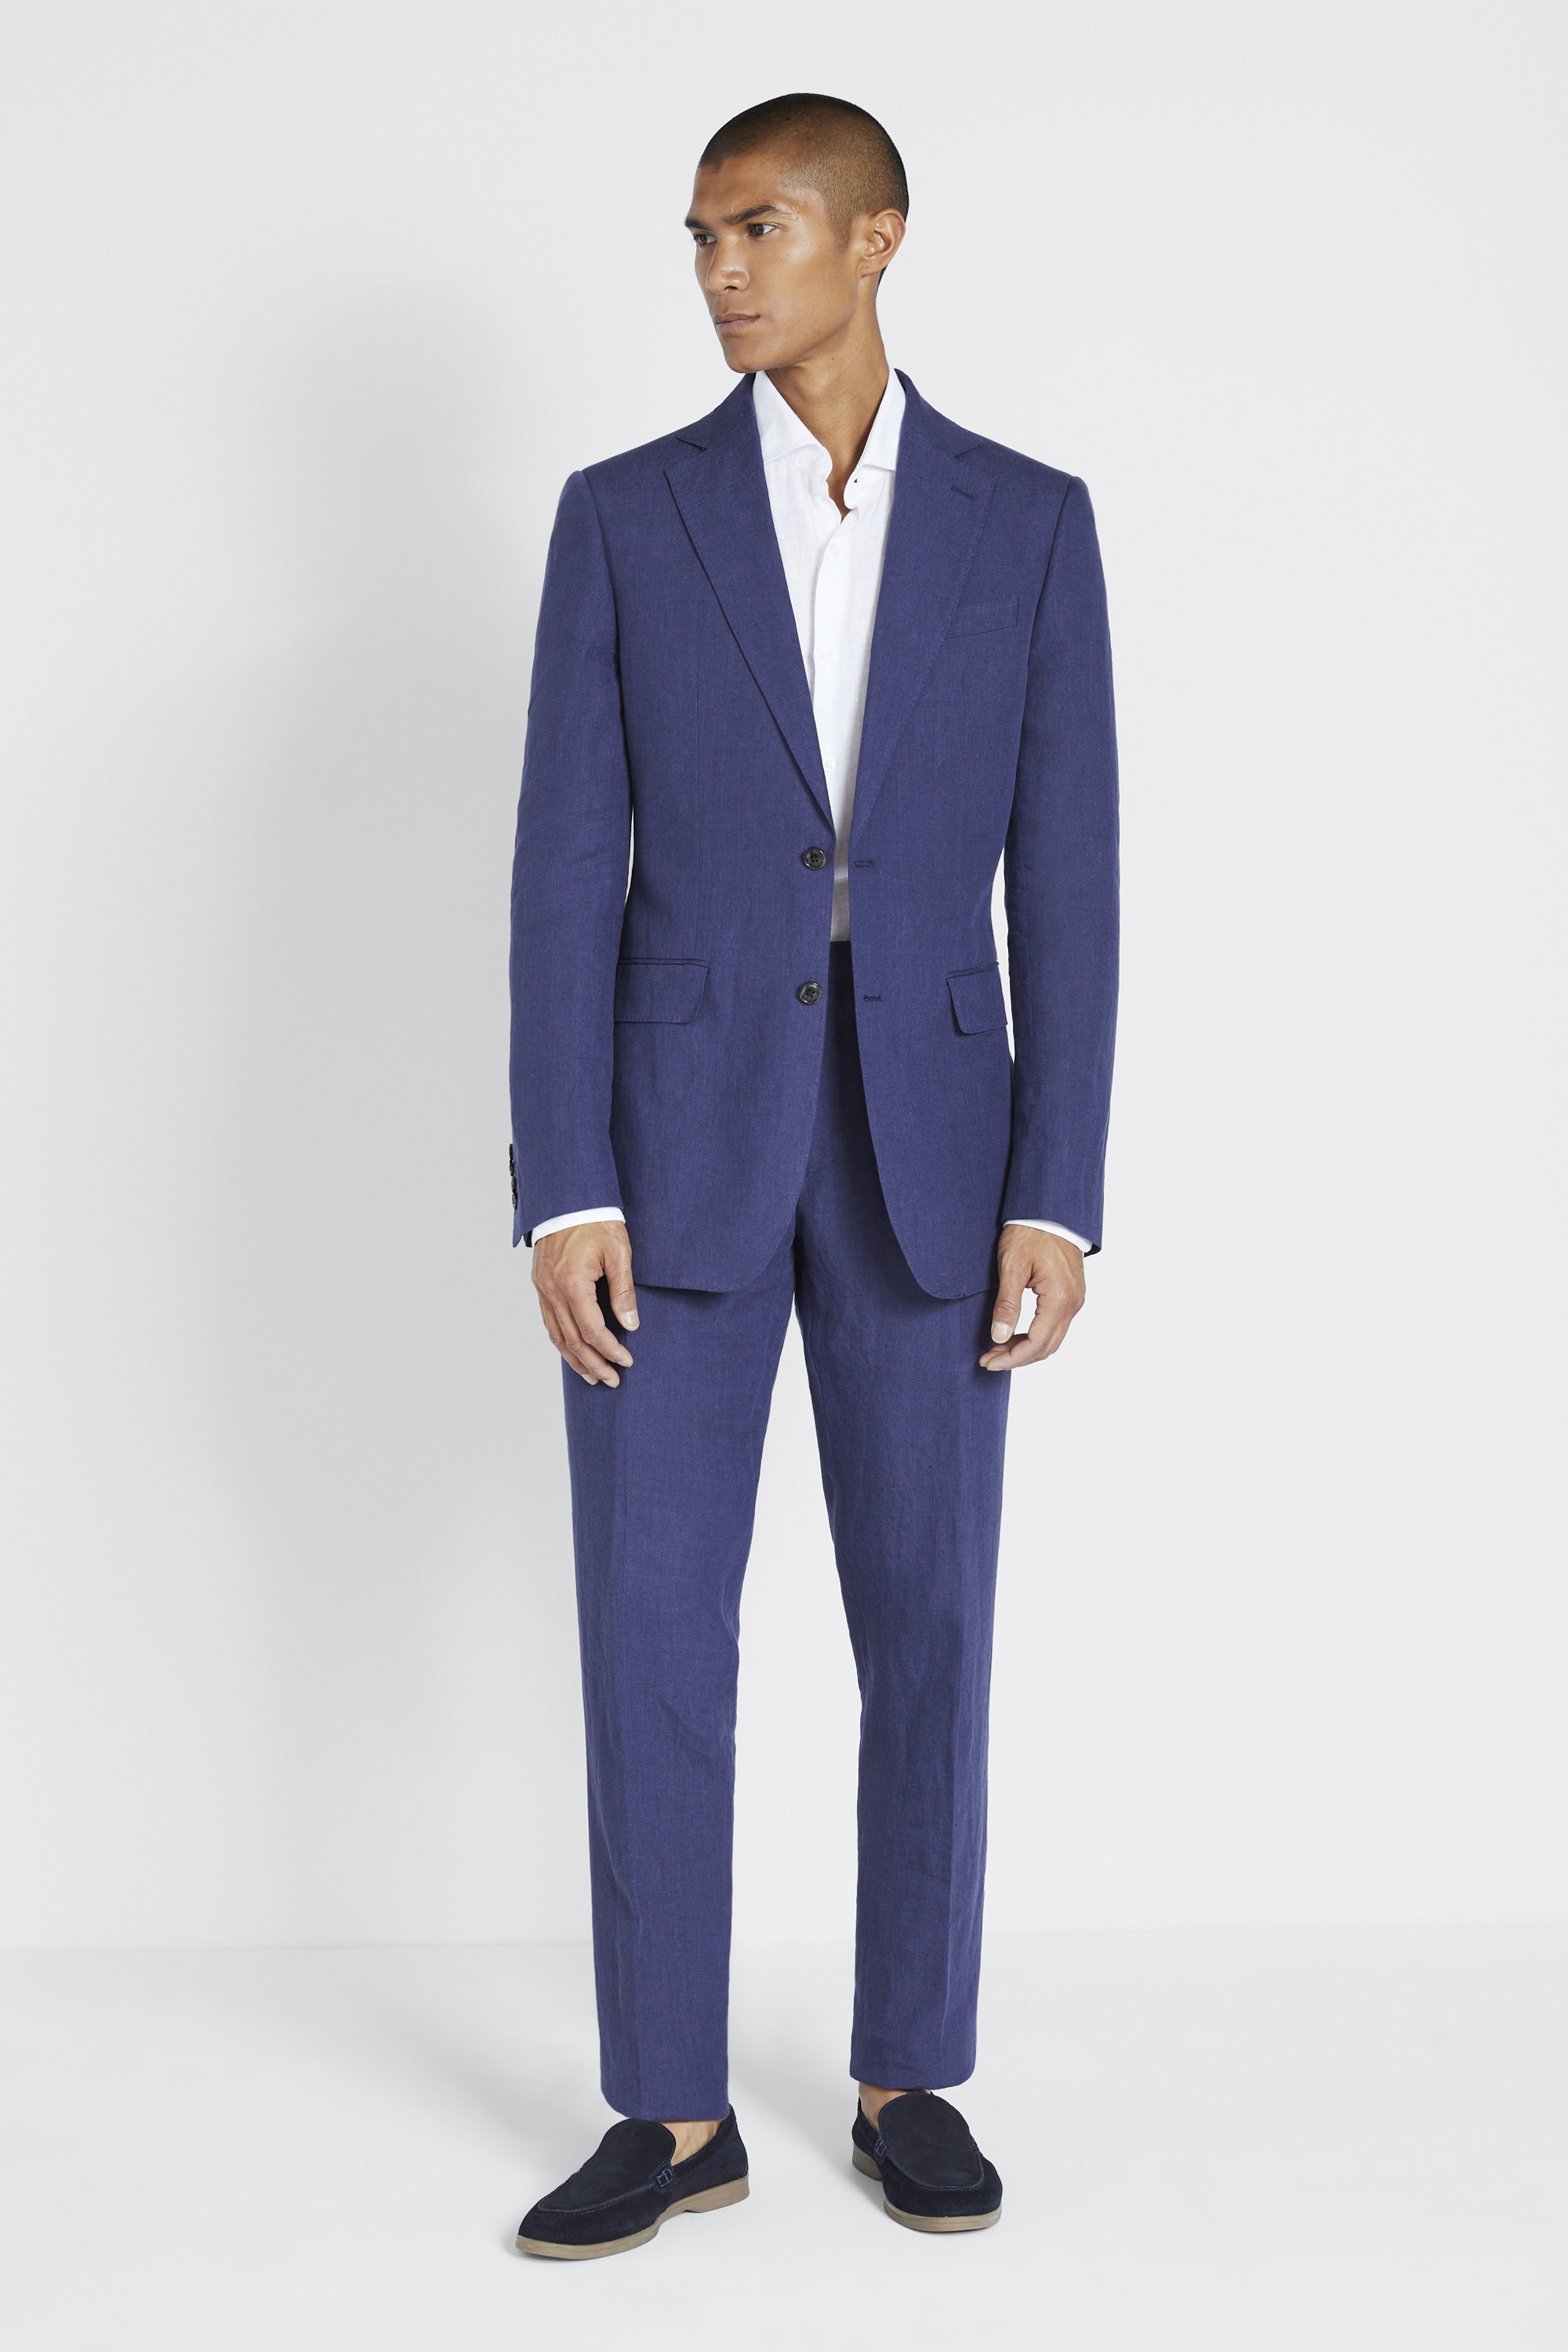 Tailored Fit Indigo Linen Suit Jacket | Buy Online at Moss